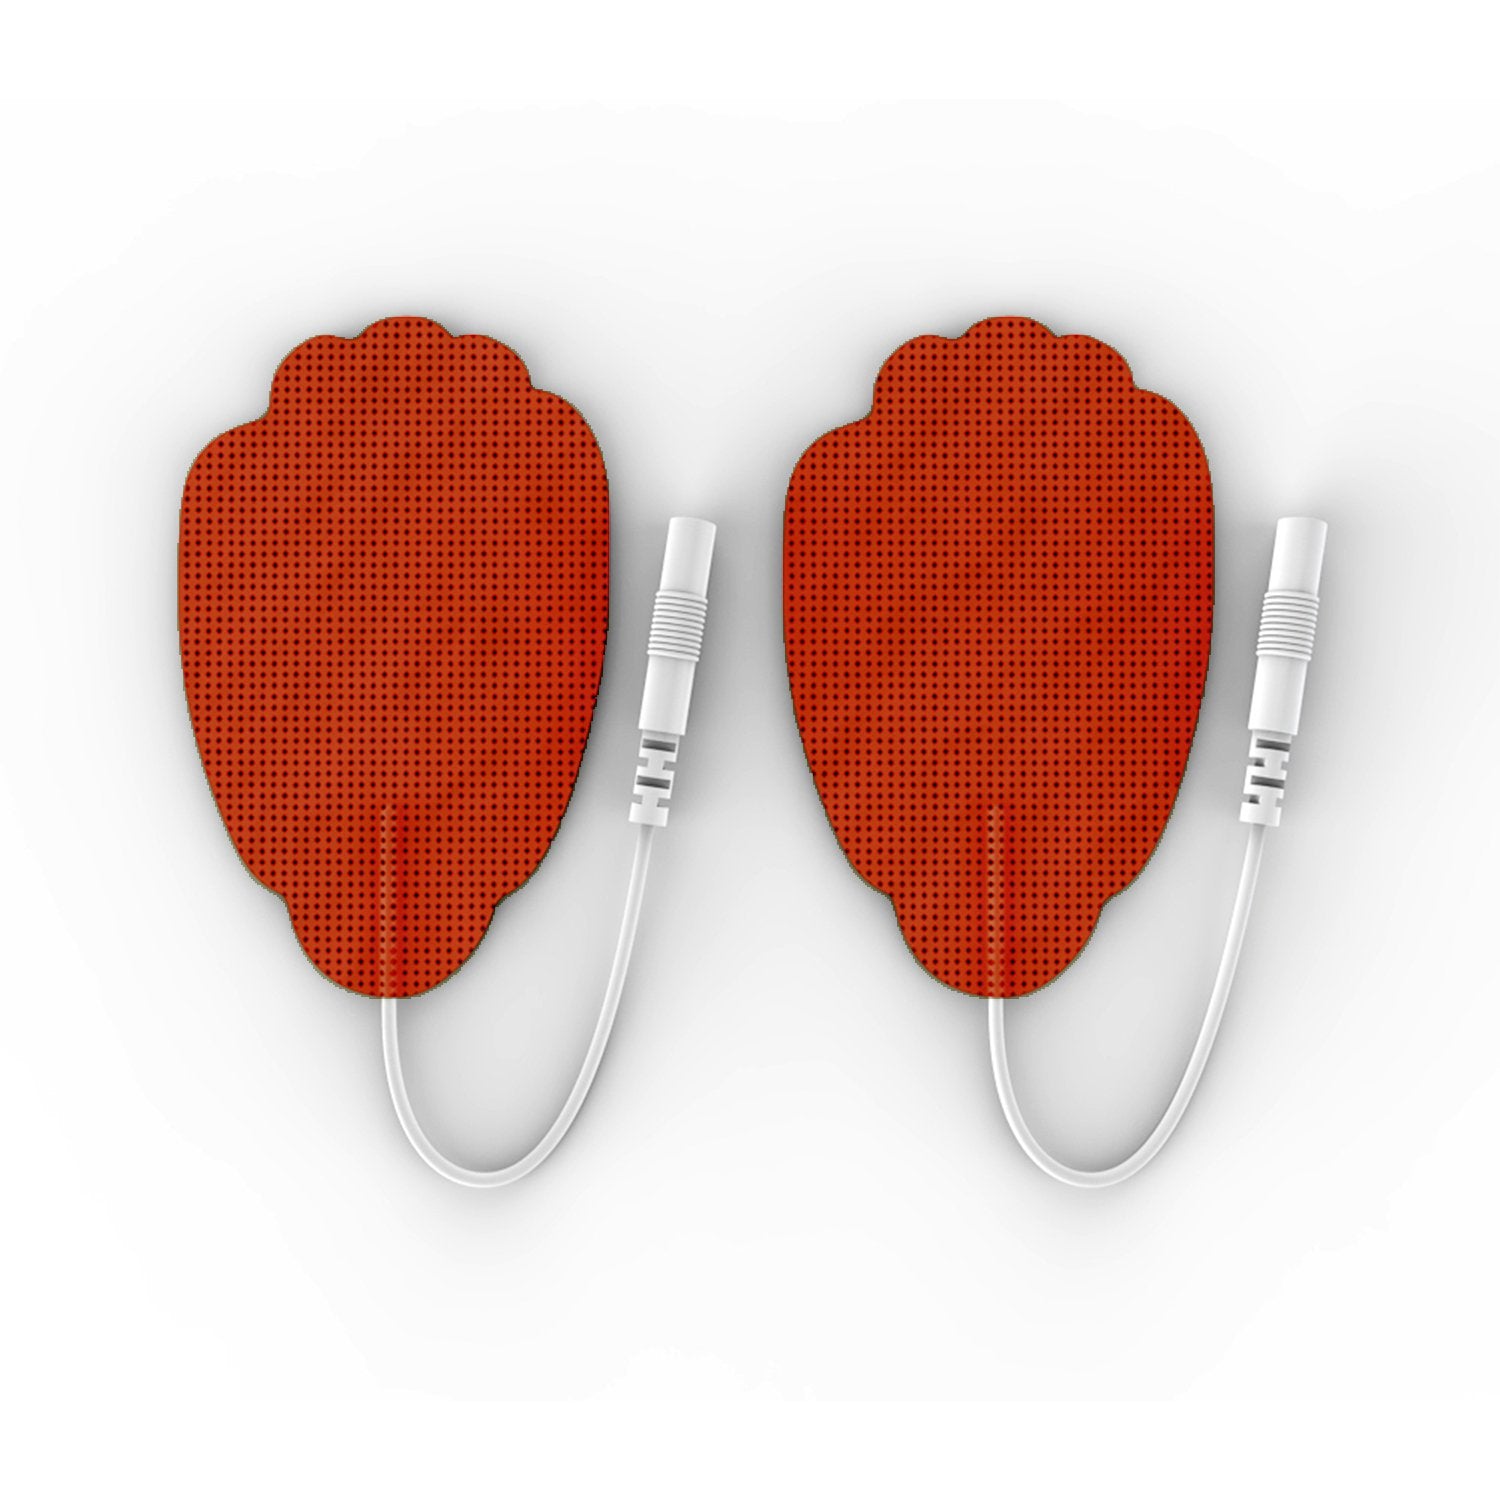 5 Pairs (10 Pcs) Red Pin-Insert Large Hand-Shaped Pads - HealthmateForever.com